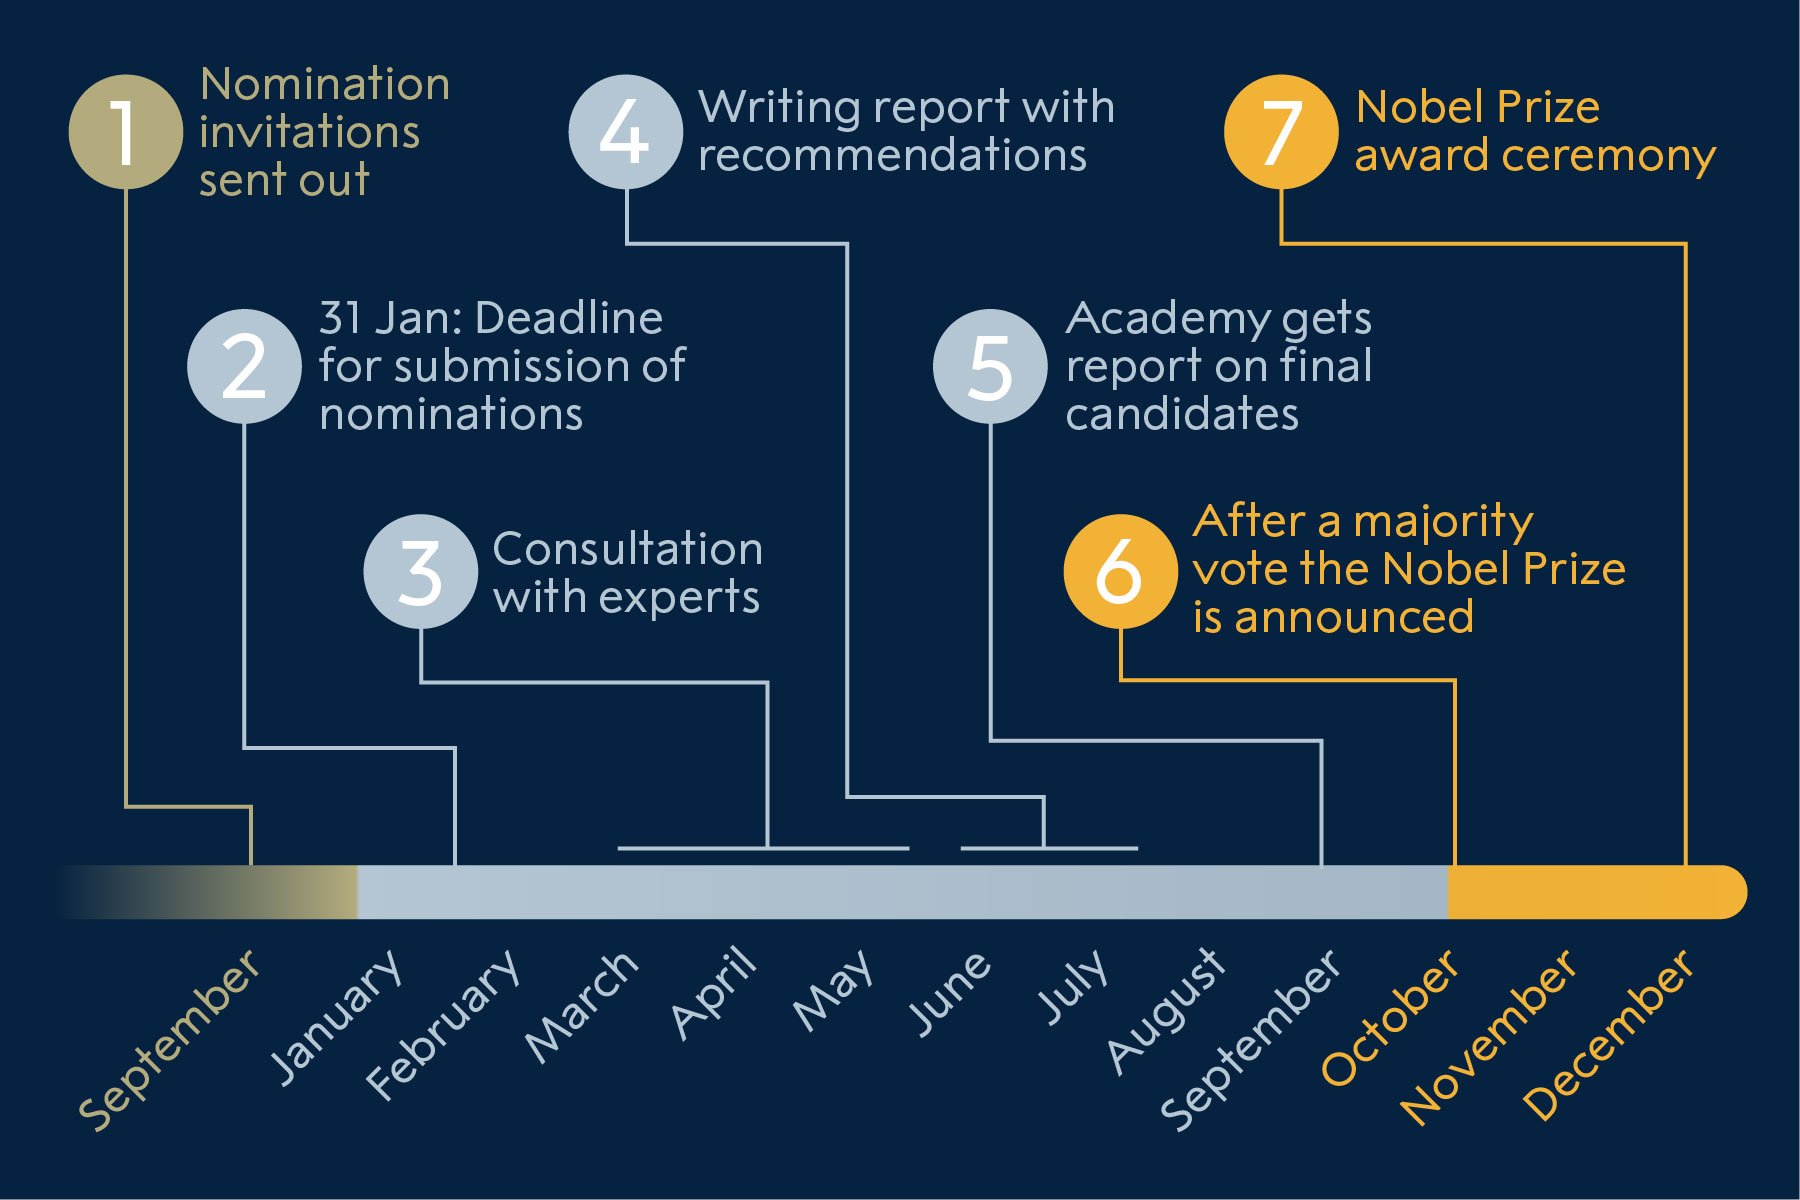 The nomination process for Nobel Laureates in Chemistry